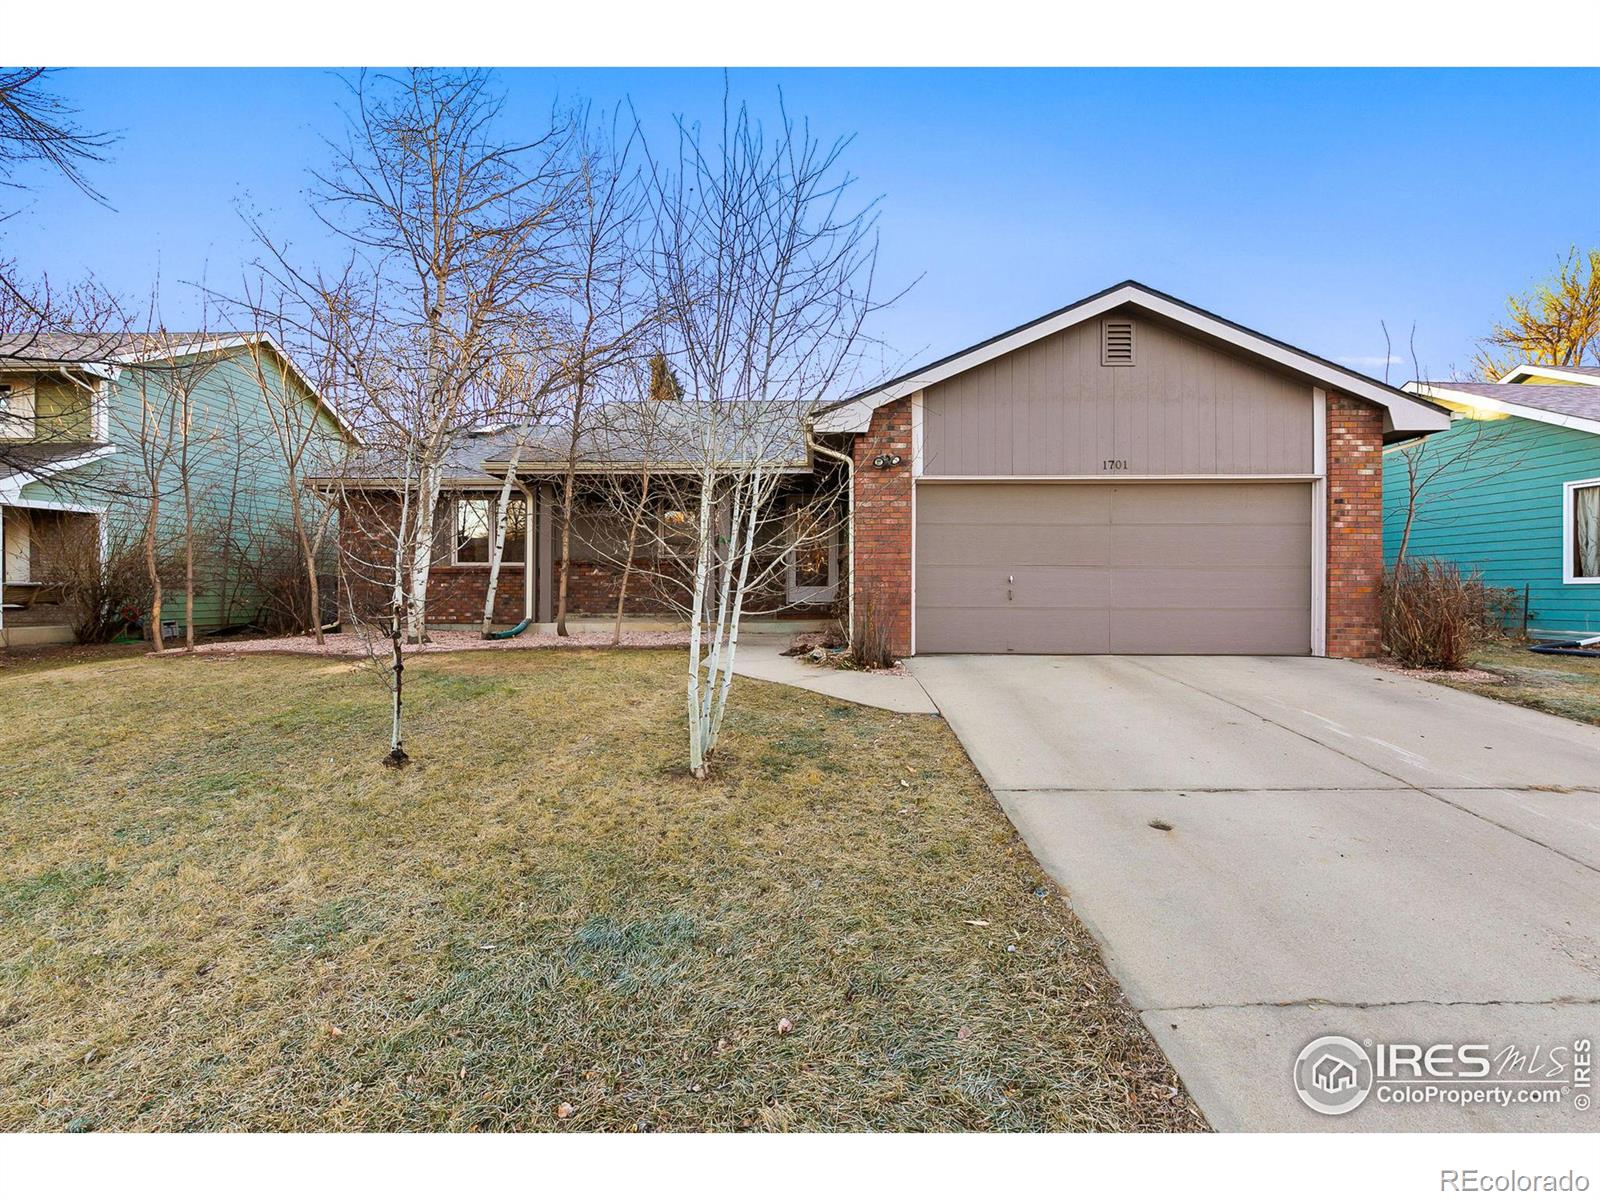 1701  Trailwood Drive, fort collins MLS: 4567891001116 Beds: 4 Baths: 3 Price: $629,000